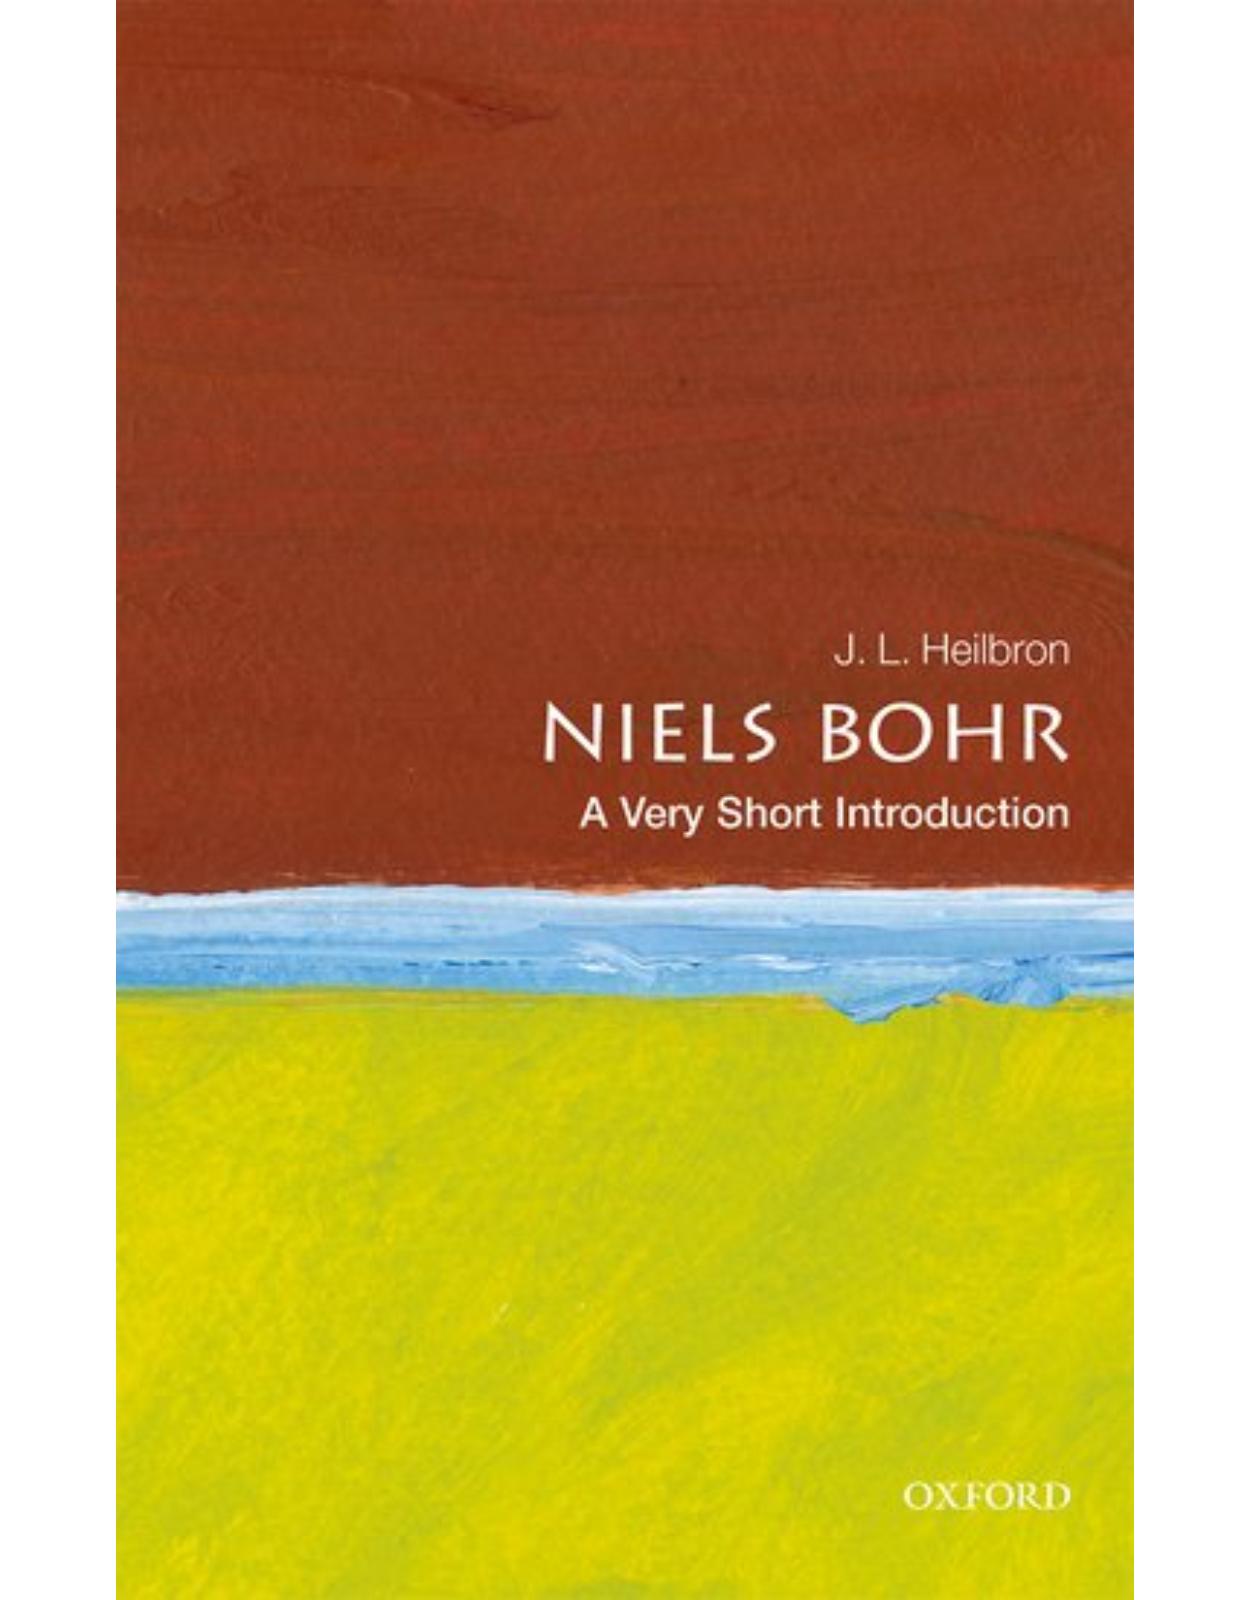 Niels Bohr: A Very Short Introduction